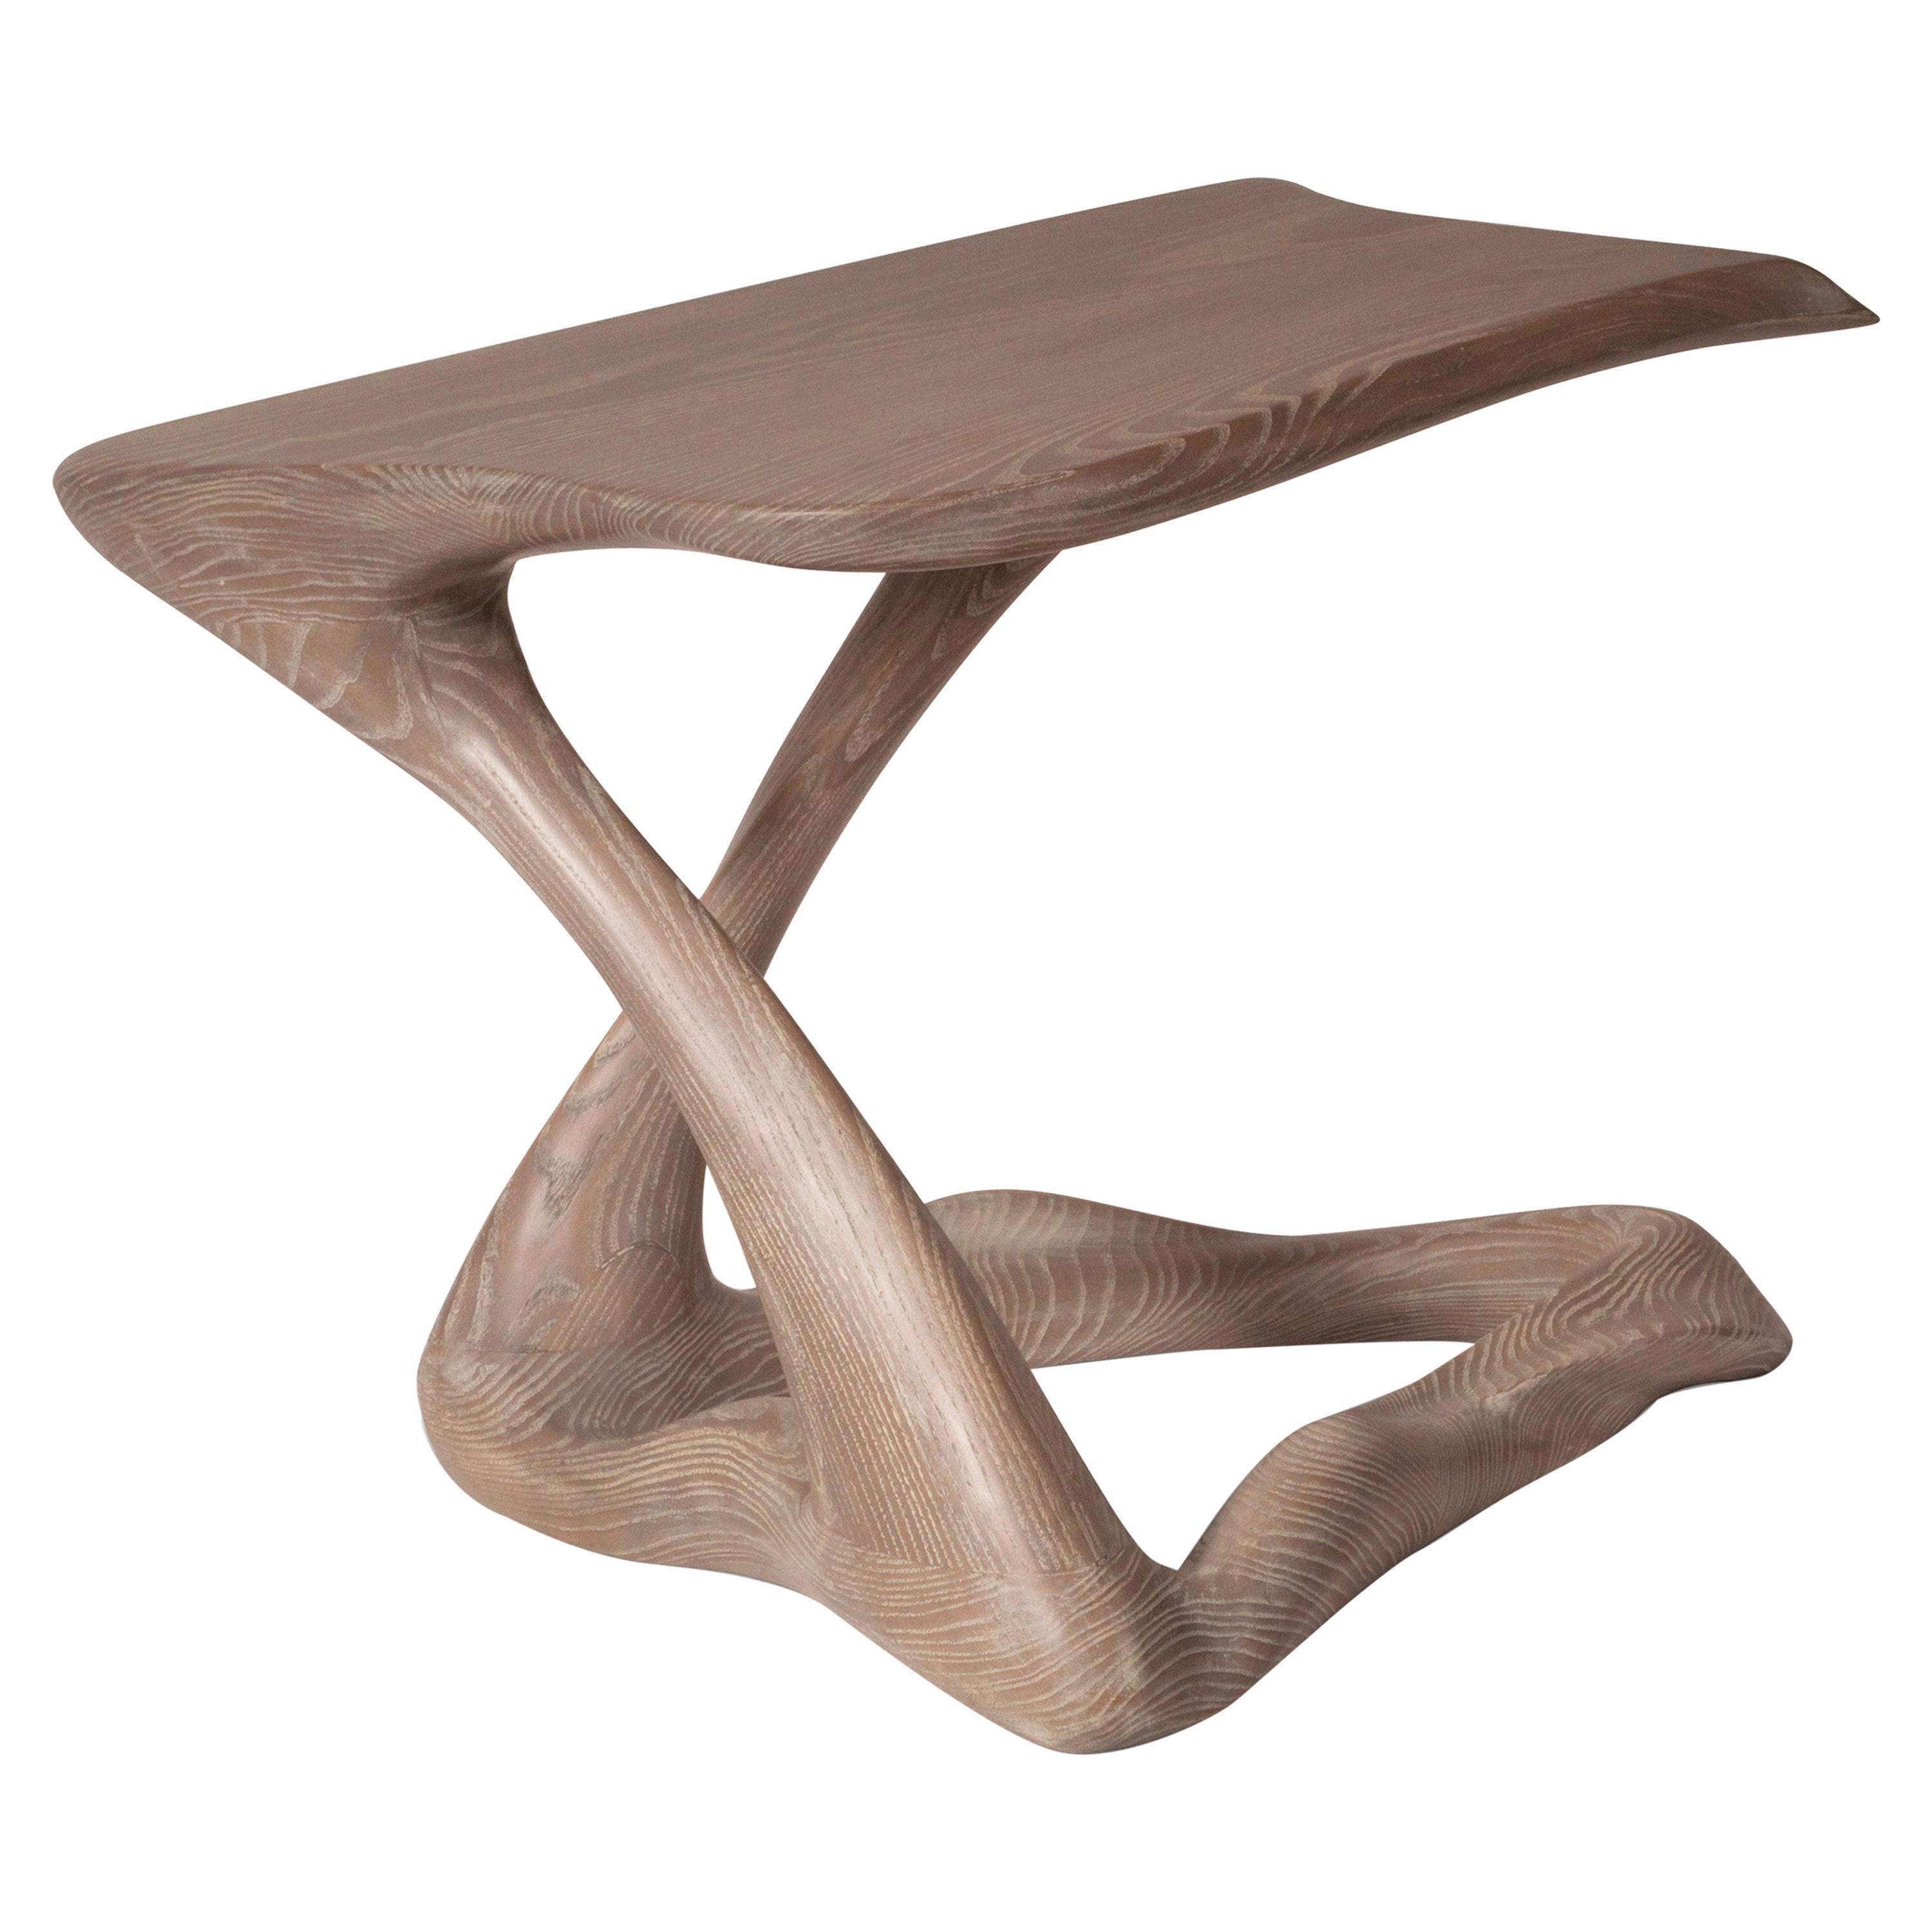 Amorph Tryst Modern Side Table, Amorph Mesa stain on Ash wood 